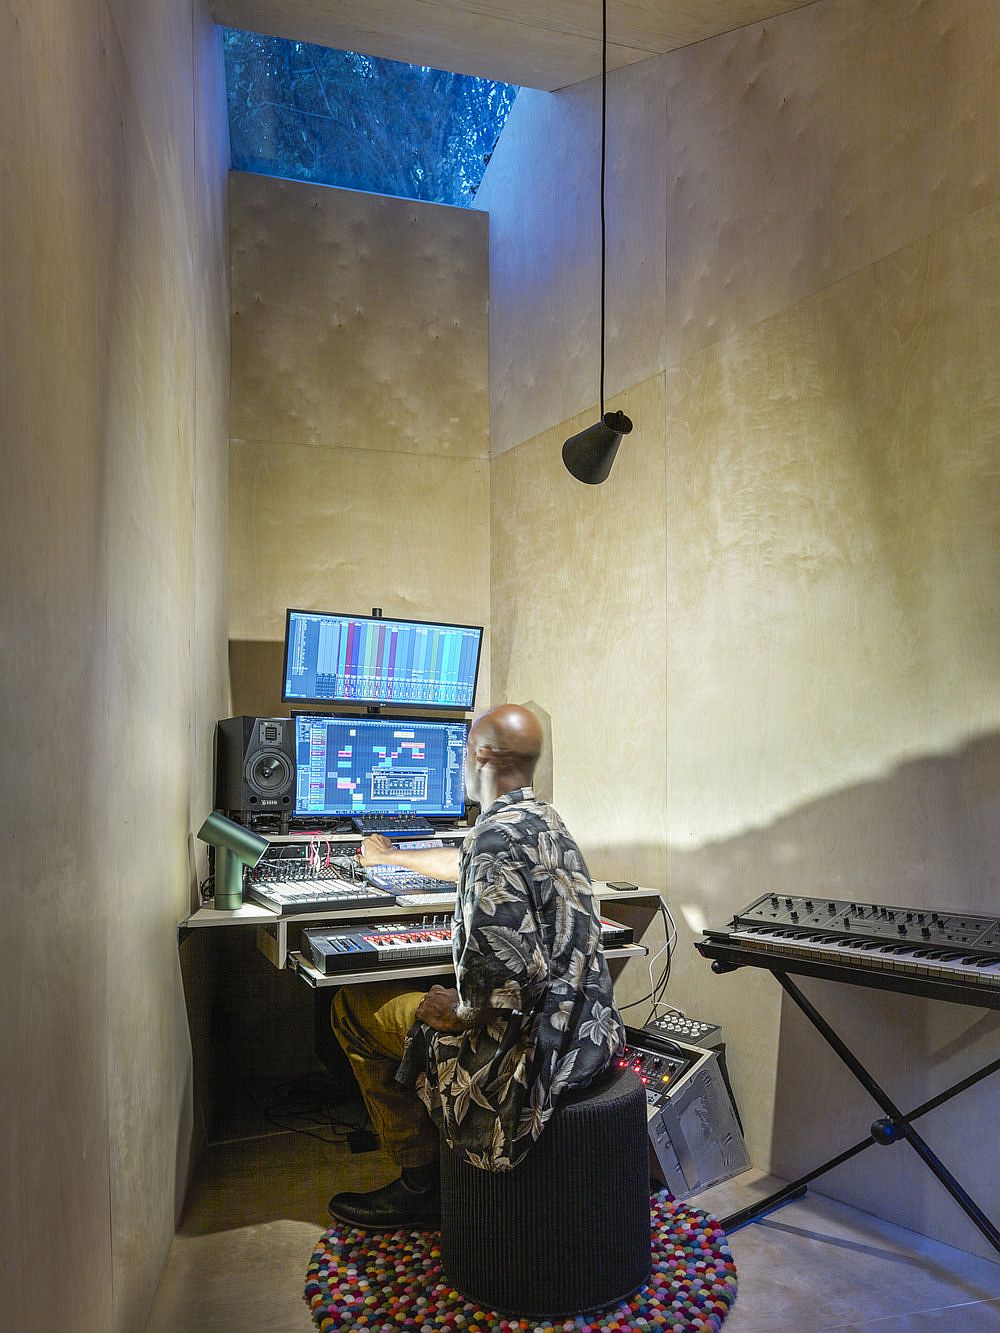 Skylight-coupled-with-smart-secondary-ambient-lighting-inside-the-small-music-studio-79716